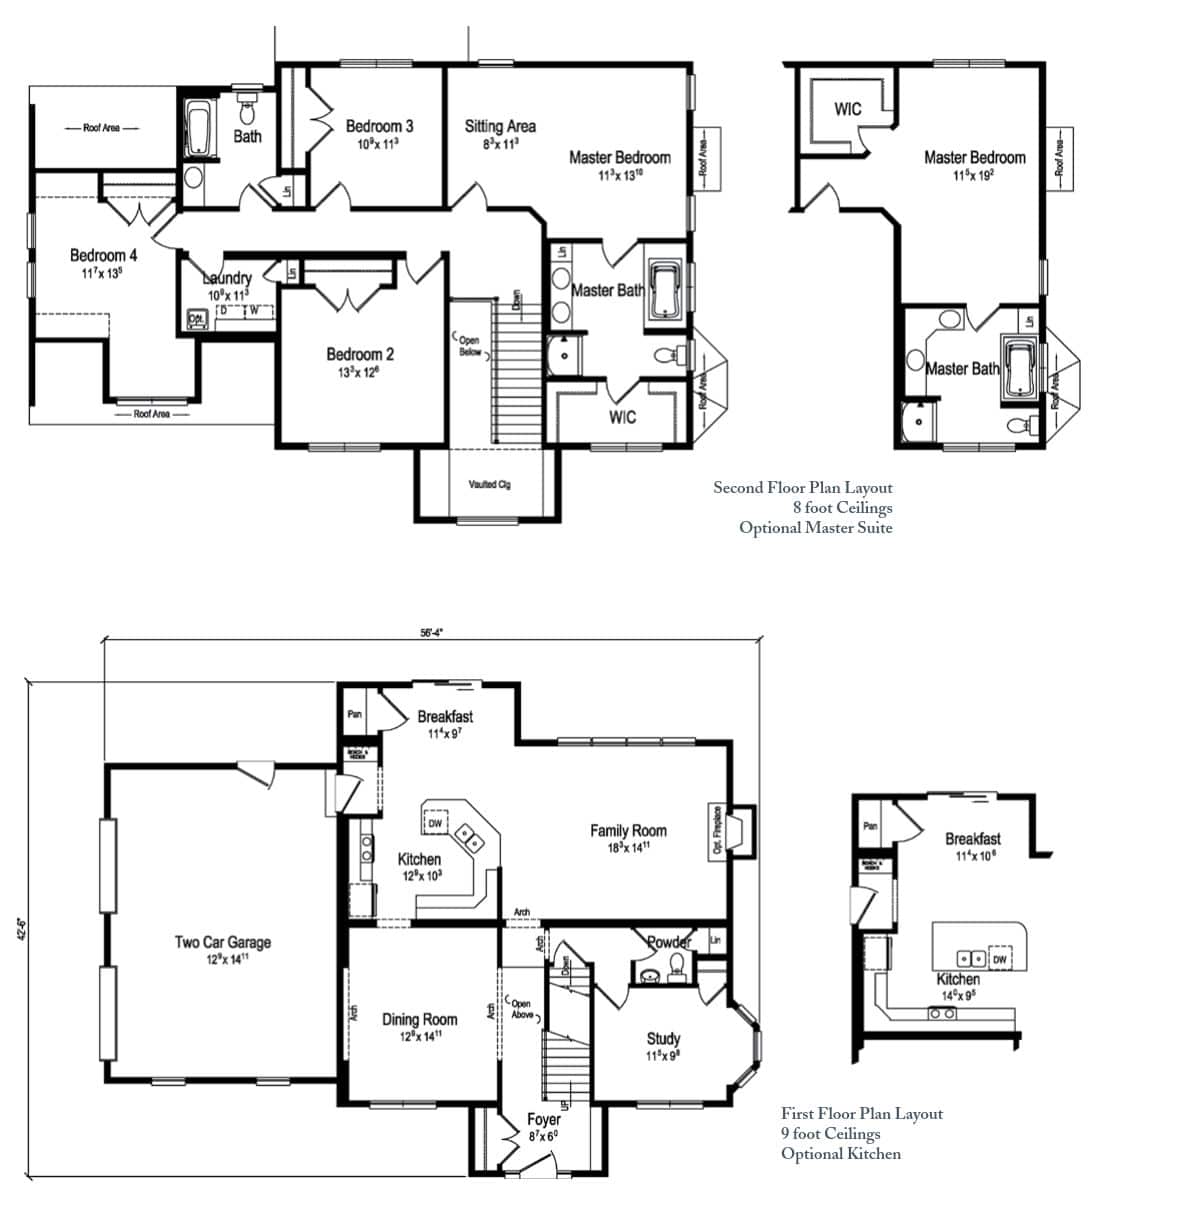 The Stiles Two Story Home Floor Plan